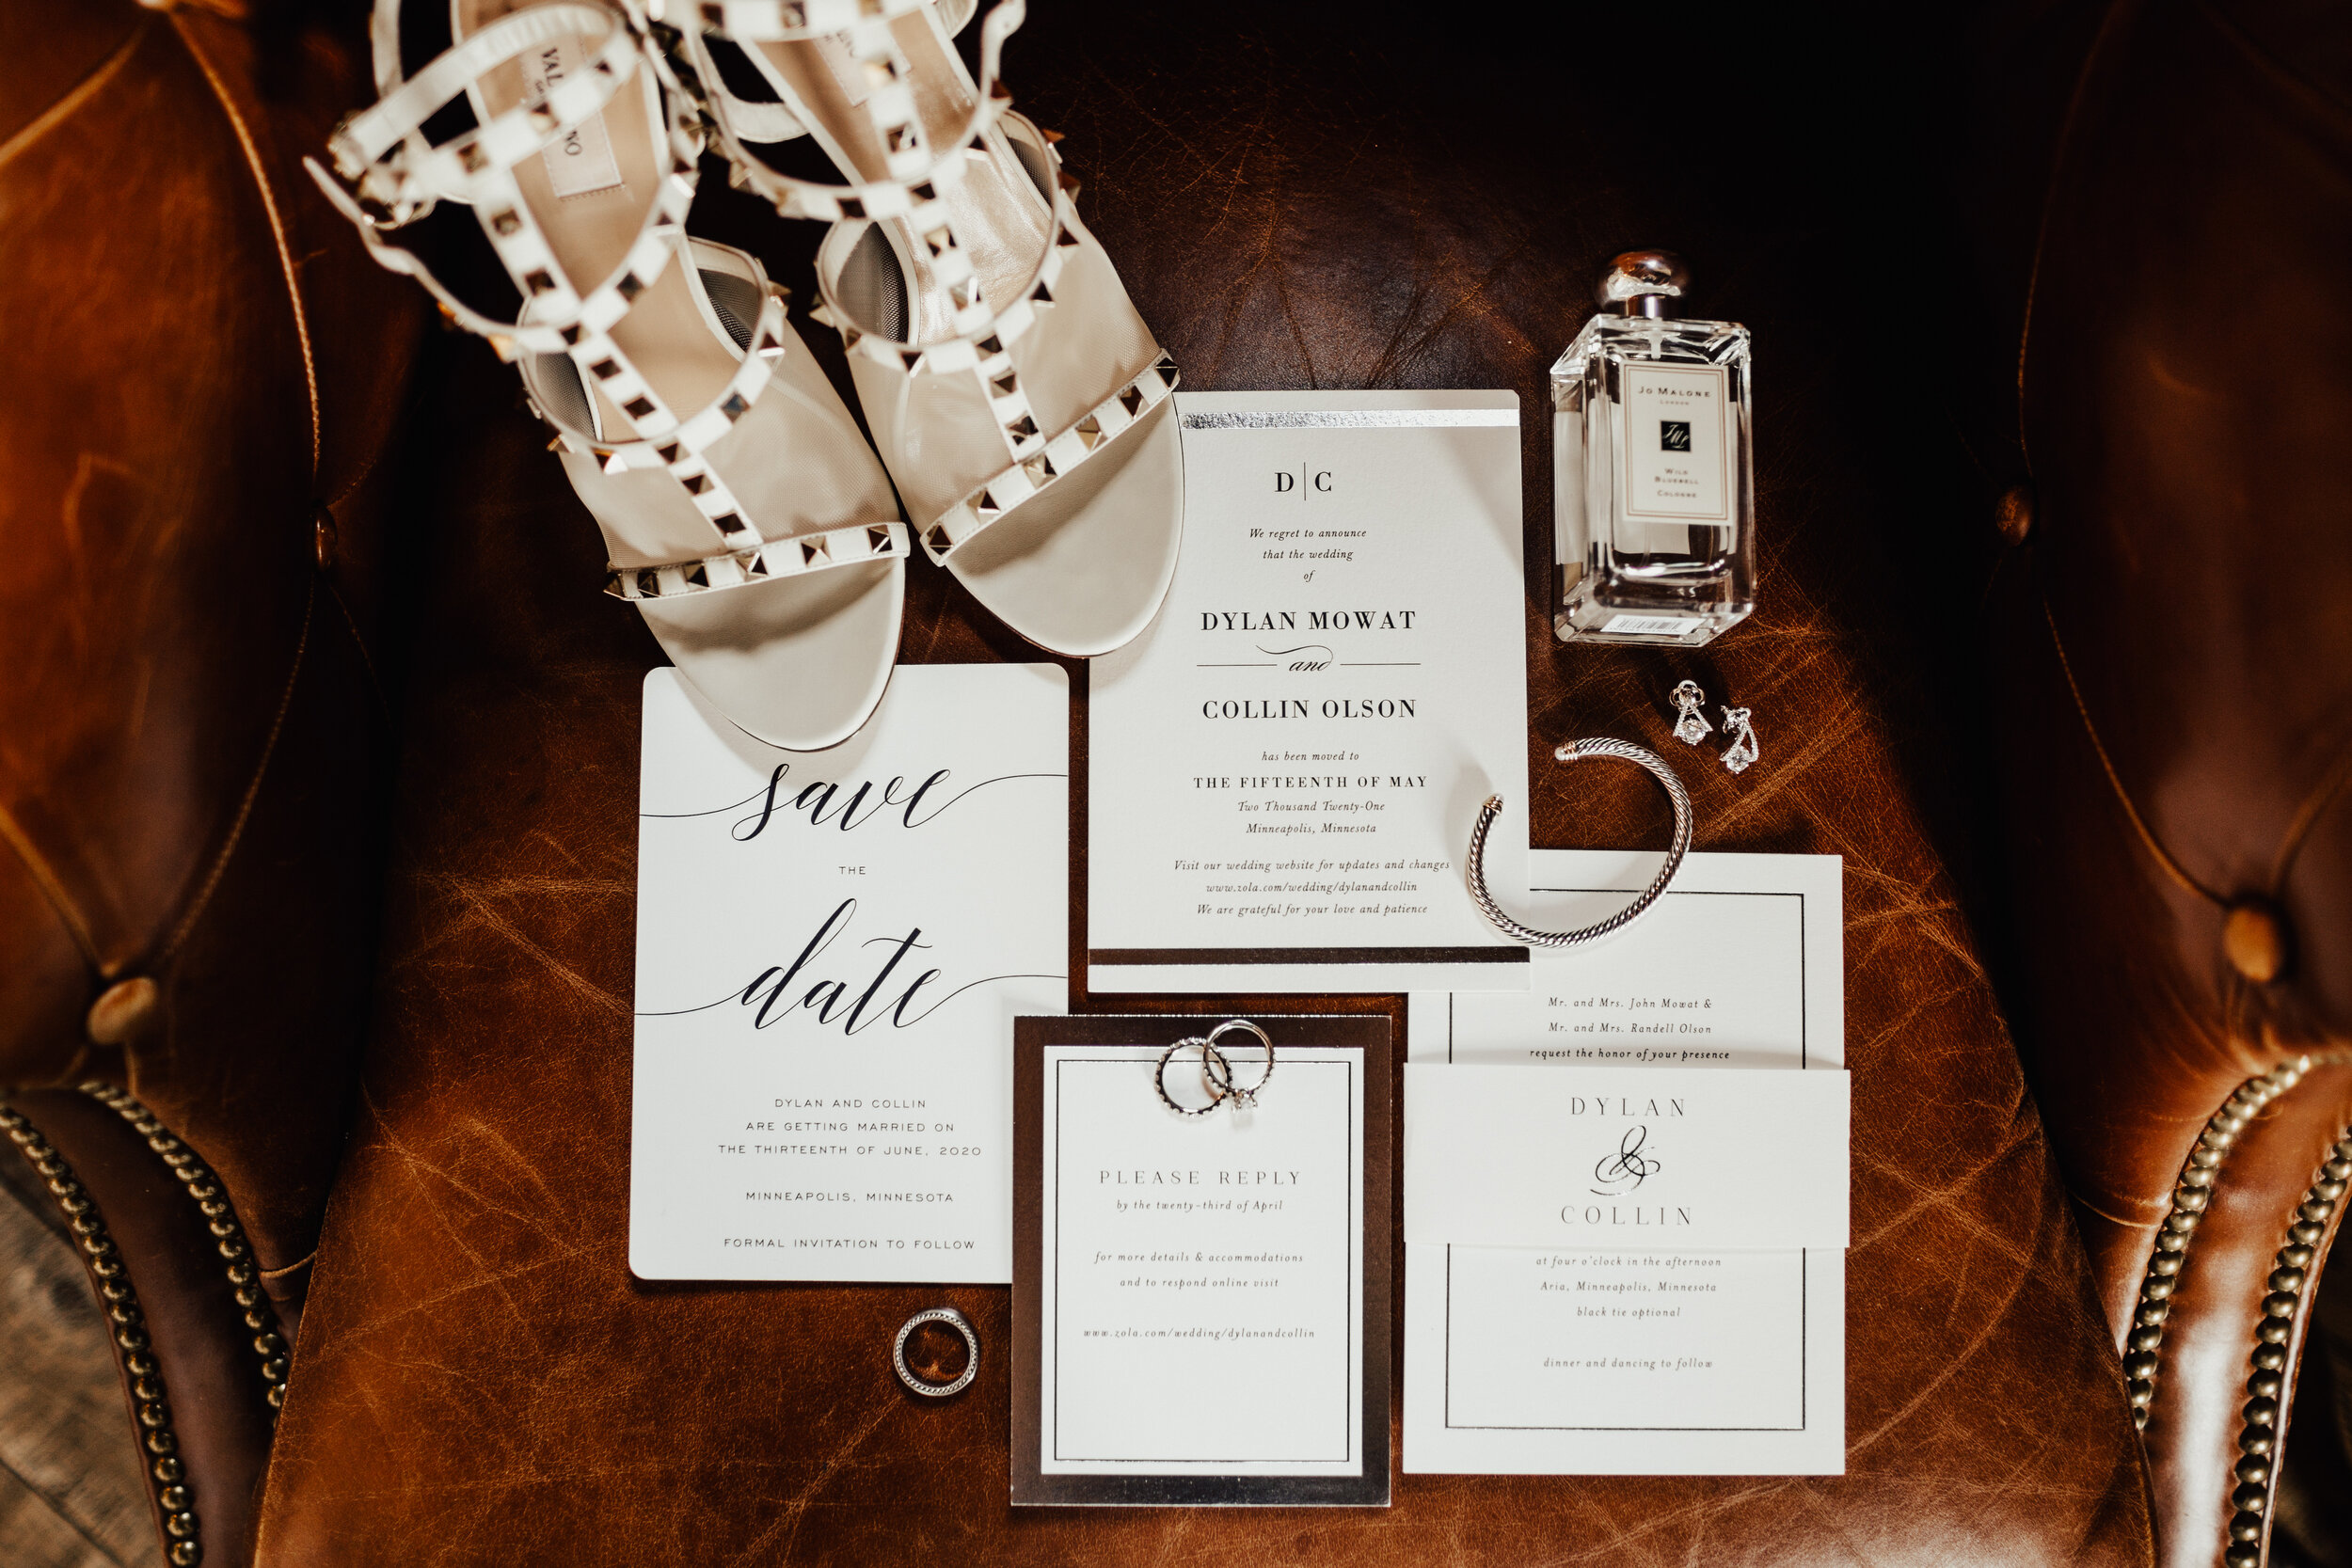  wedding invitations and bride’s wedding accessories layout 